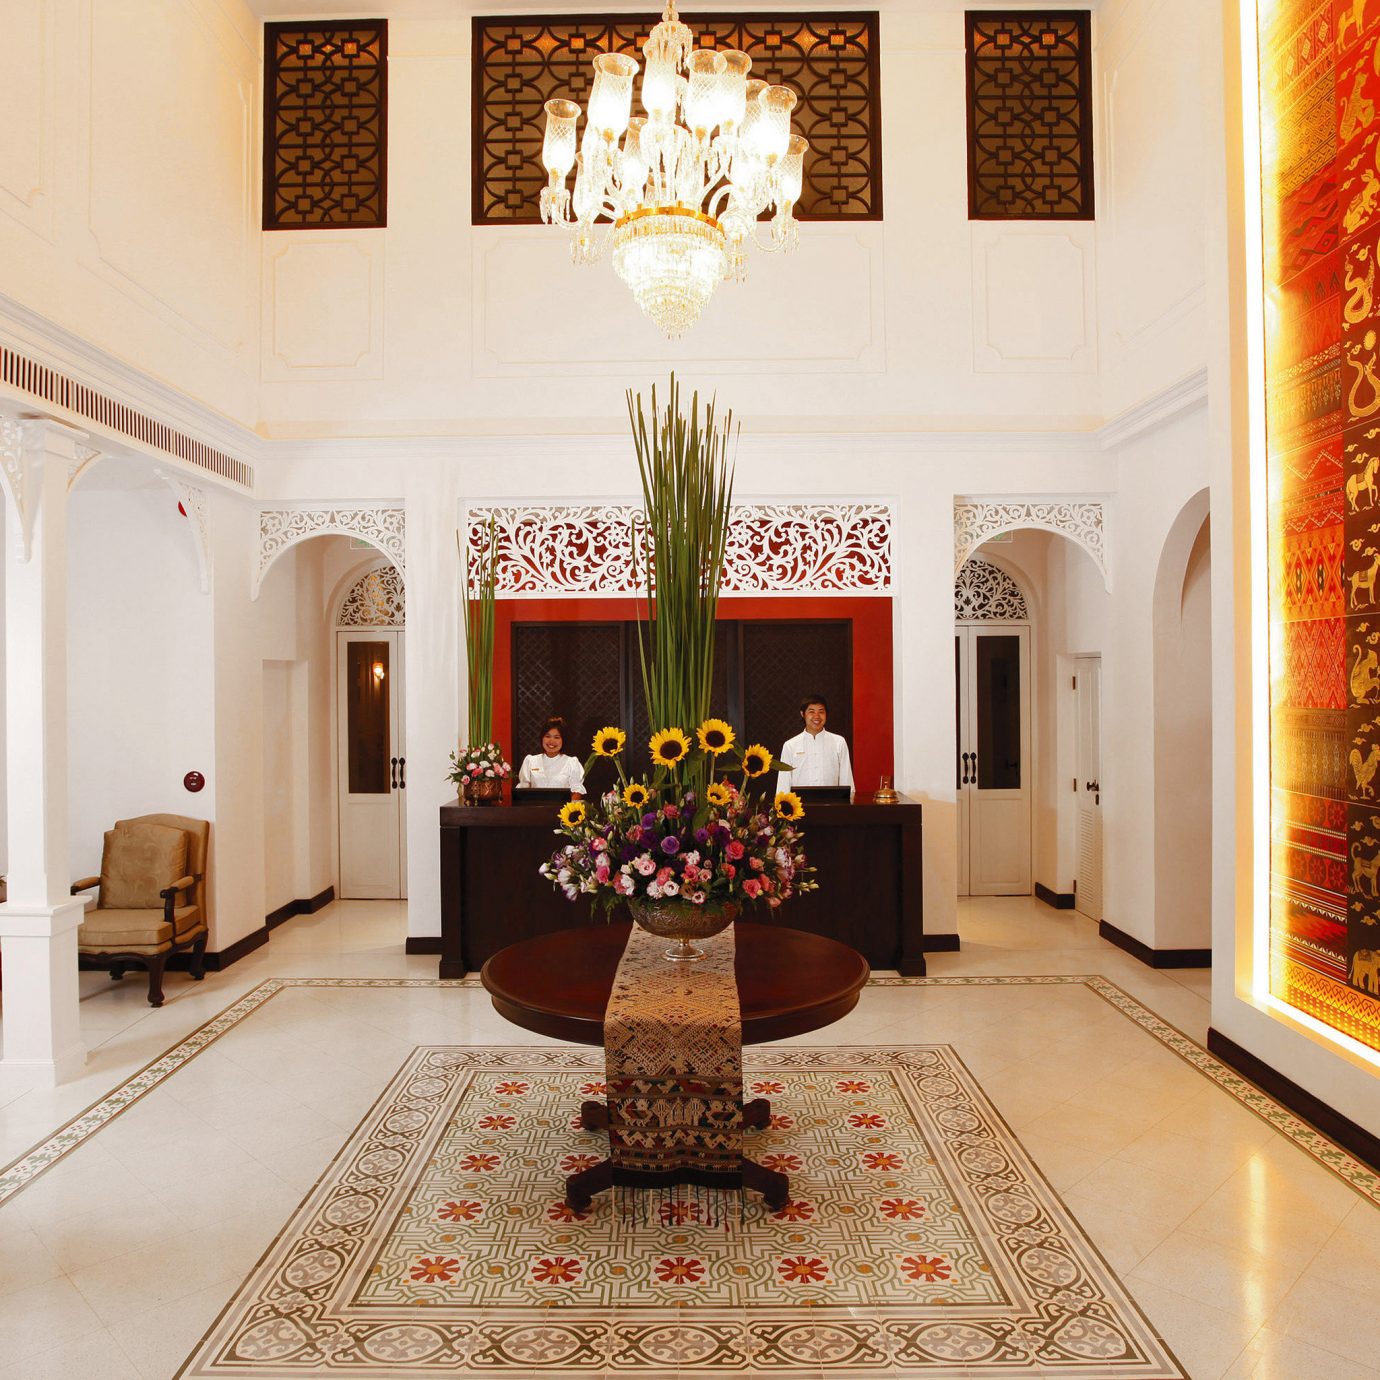 Elegant Jungle Lobby Lounge hall home living room mansion palace tourist attraction art gallery